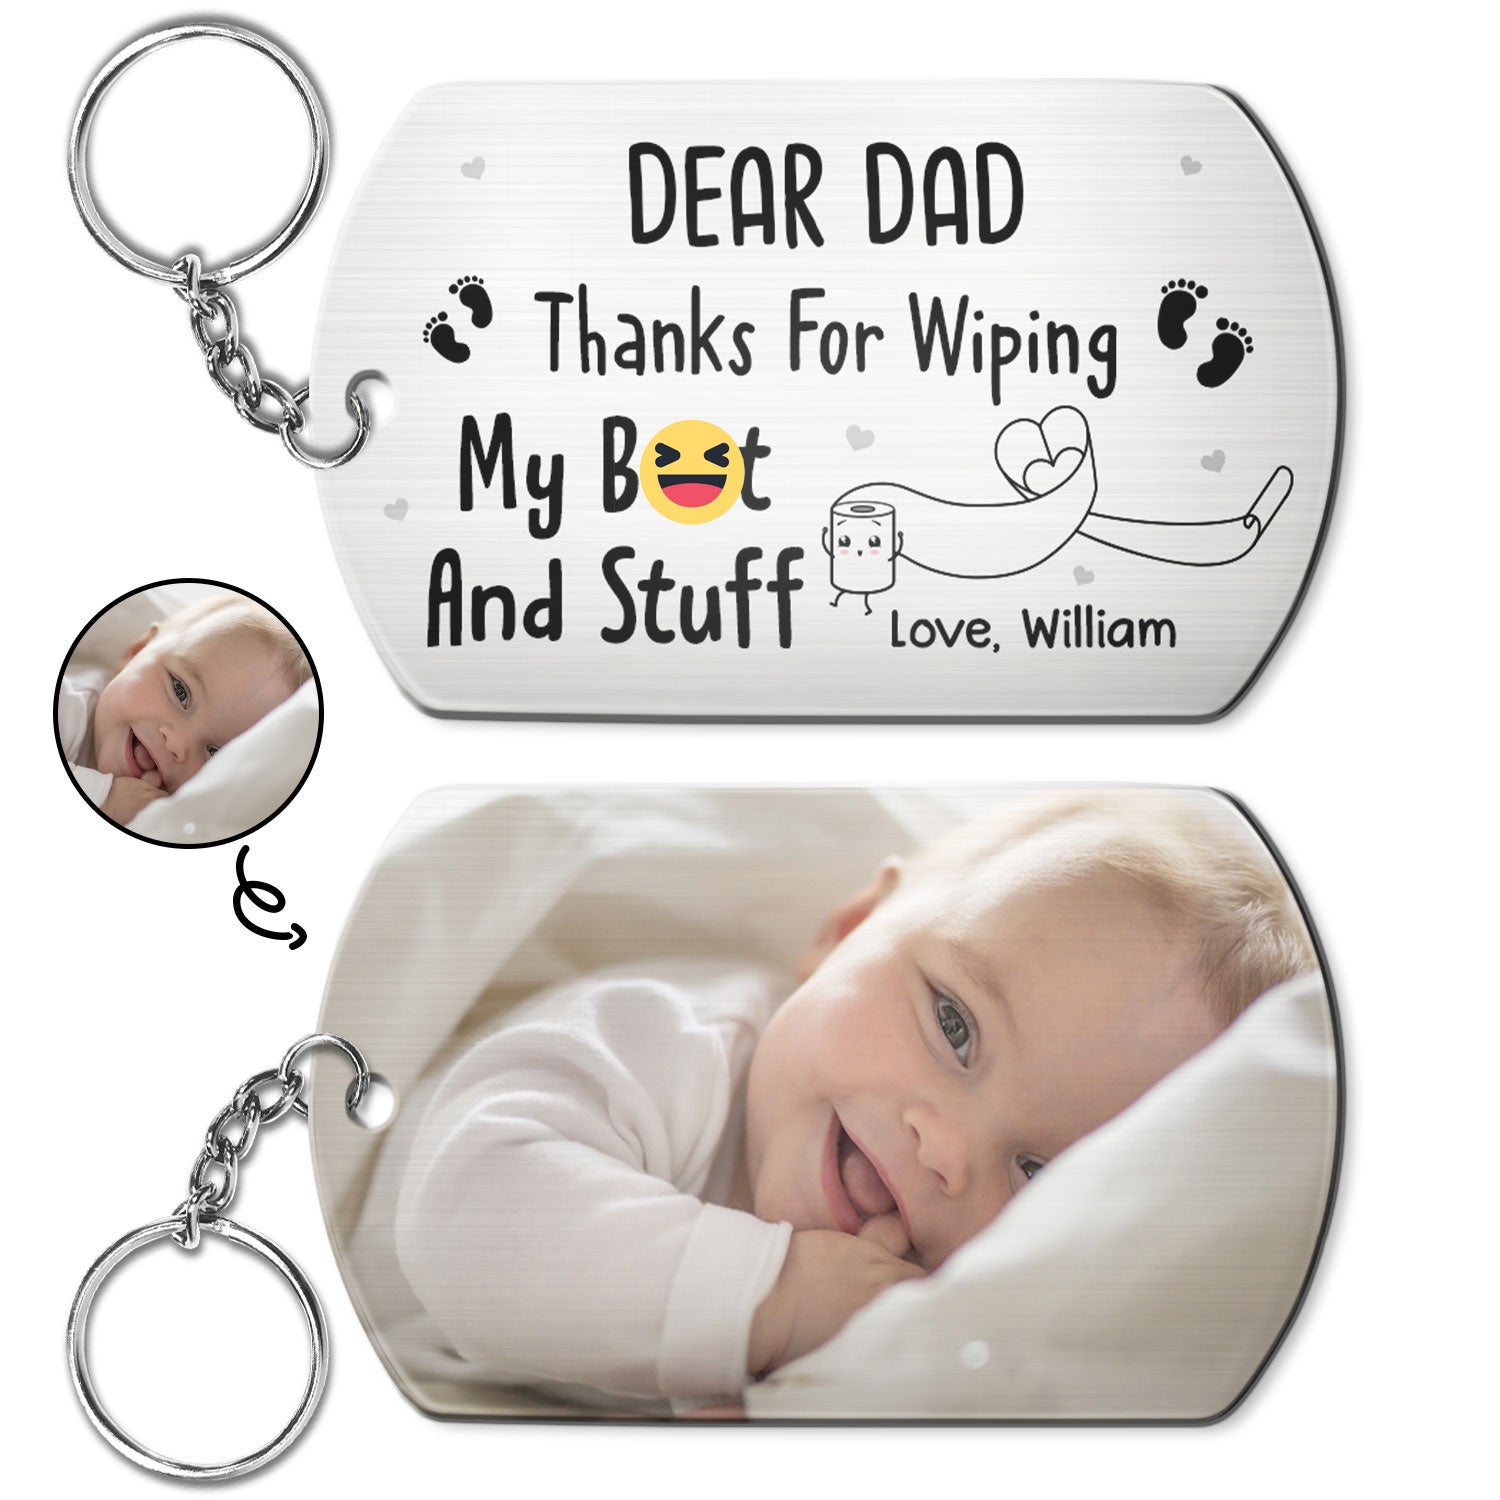 Custom Photo Dear Dad Thanks For Wiping - Gift For Father, Mother, New Mom, New Dad - Personalized Aluminum Keychain